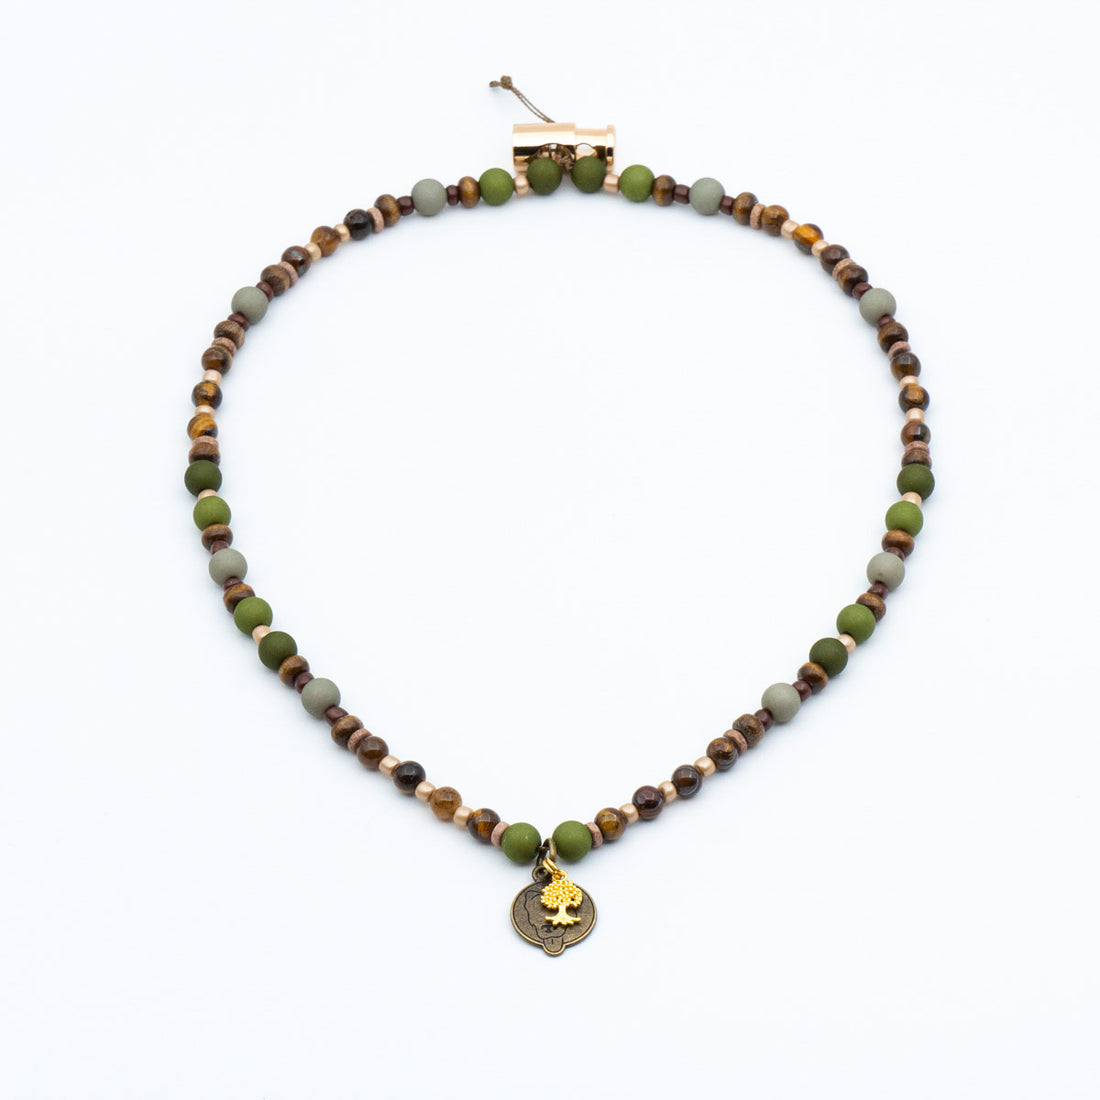 Dog necklace healing stones - Meadow (tiger eye)